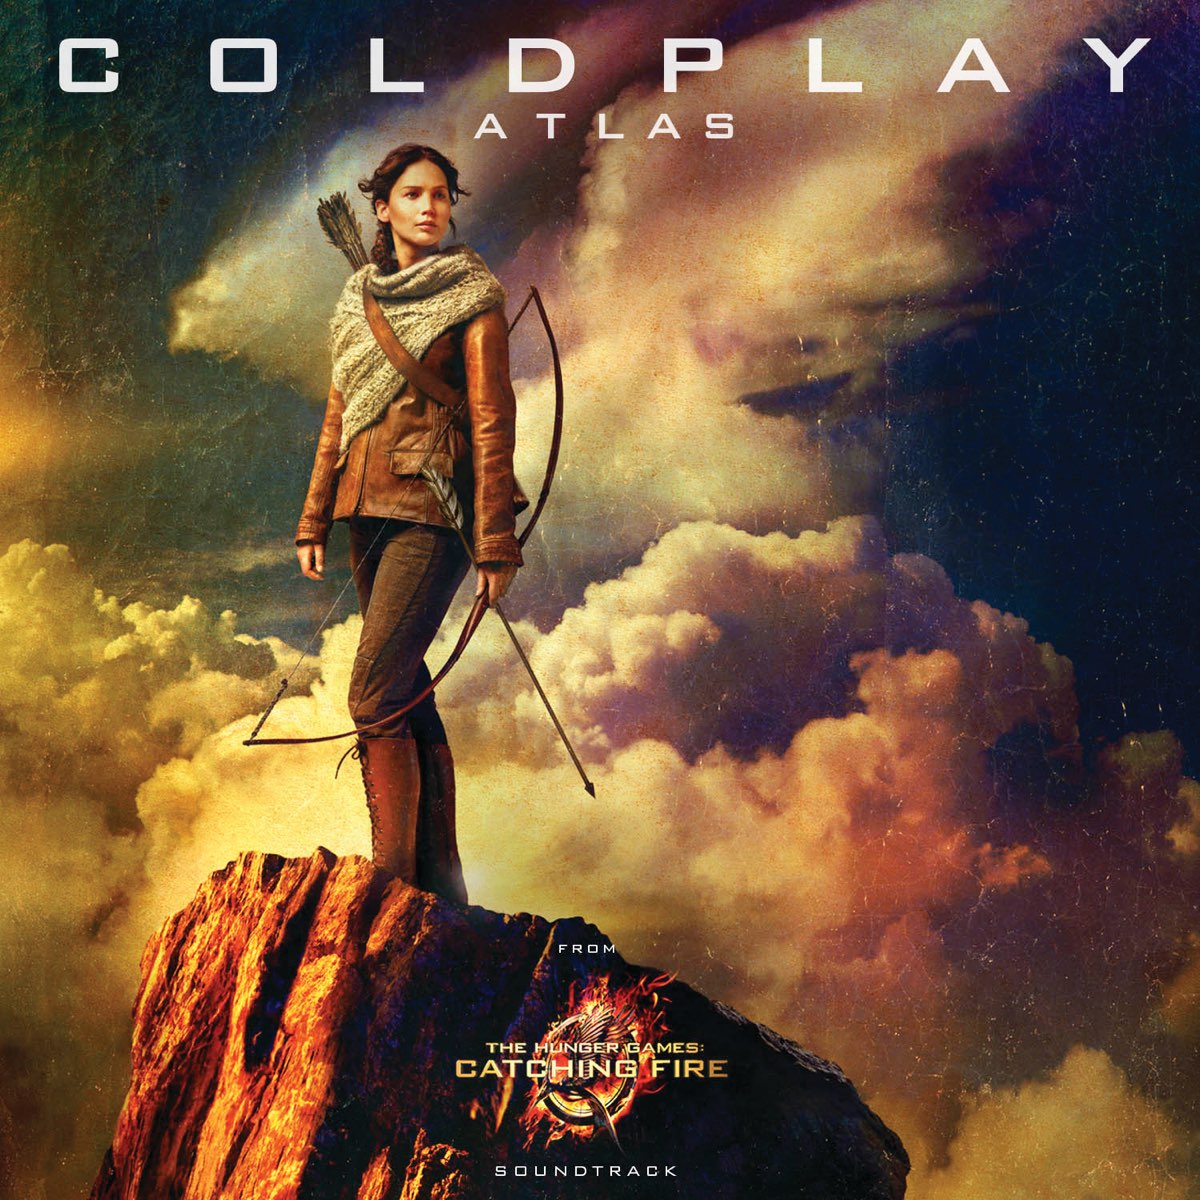 ‎atlas From The Hunger Games Catching Fire Soundtrack Single De Coldplay En Apple Music 8642